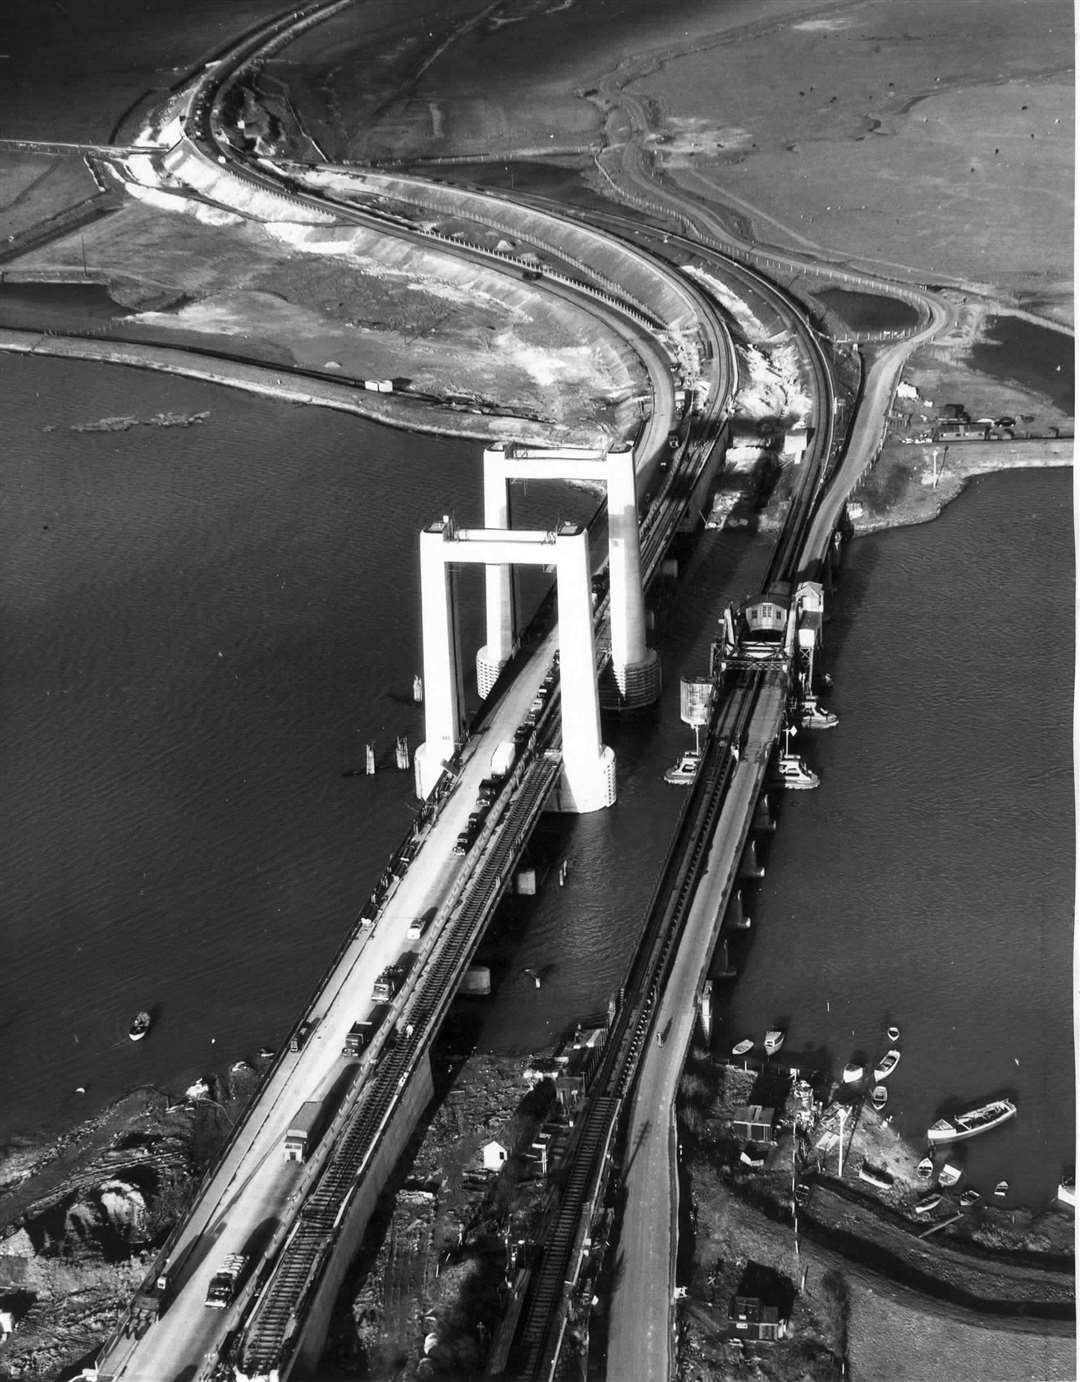 The new Kingsferry Bridge, which cost £1.4 million, came into operation at the end of February 1960. Picture: Aero Pictorial Ltd